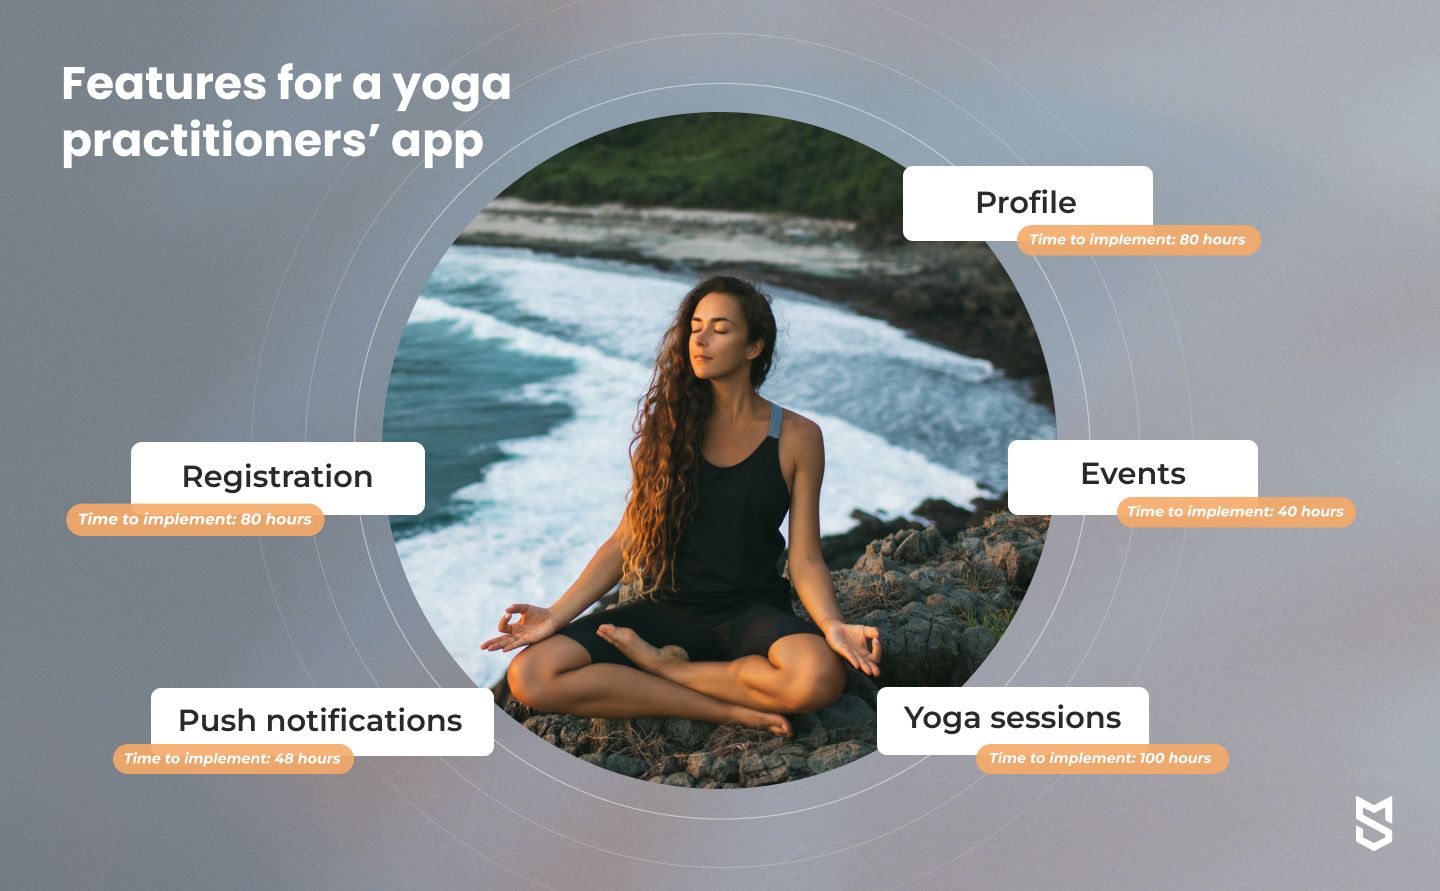 Features for a yoga practitioners’ app